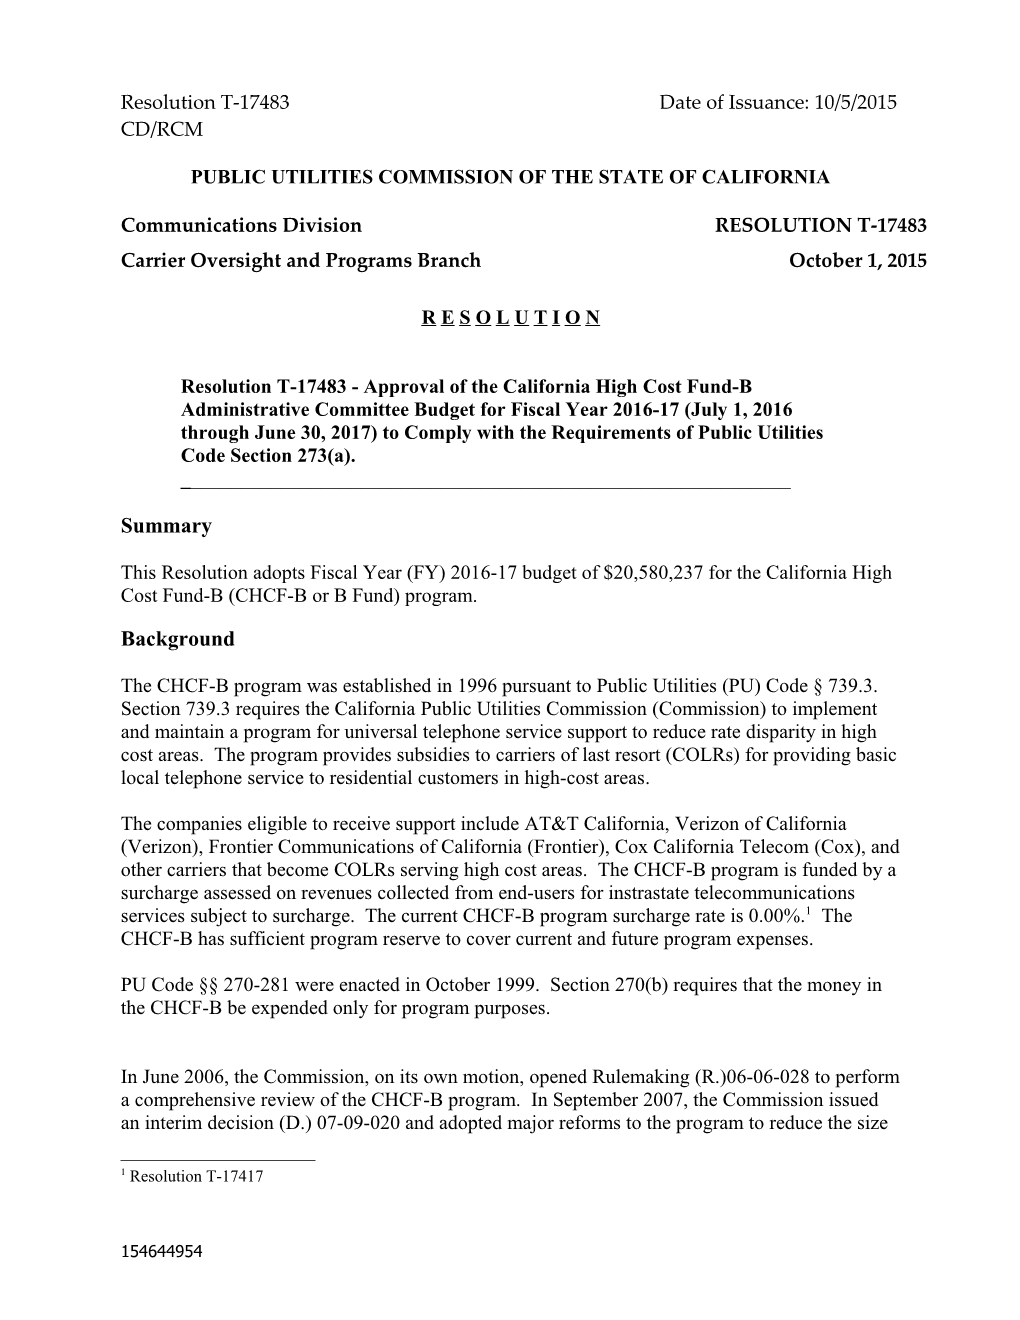 Public Utilities Commission of the State of California s96